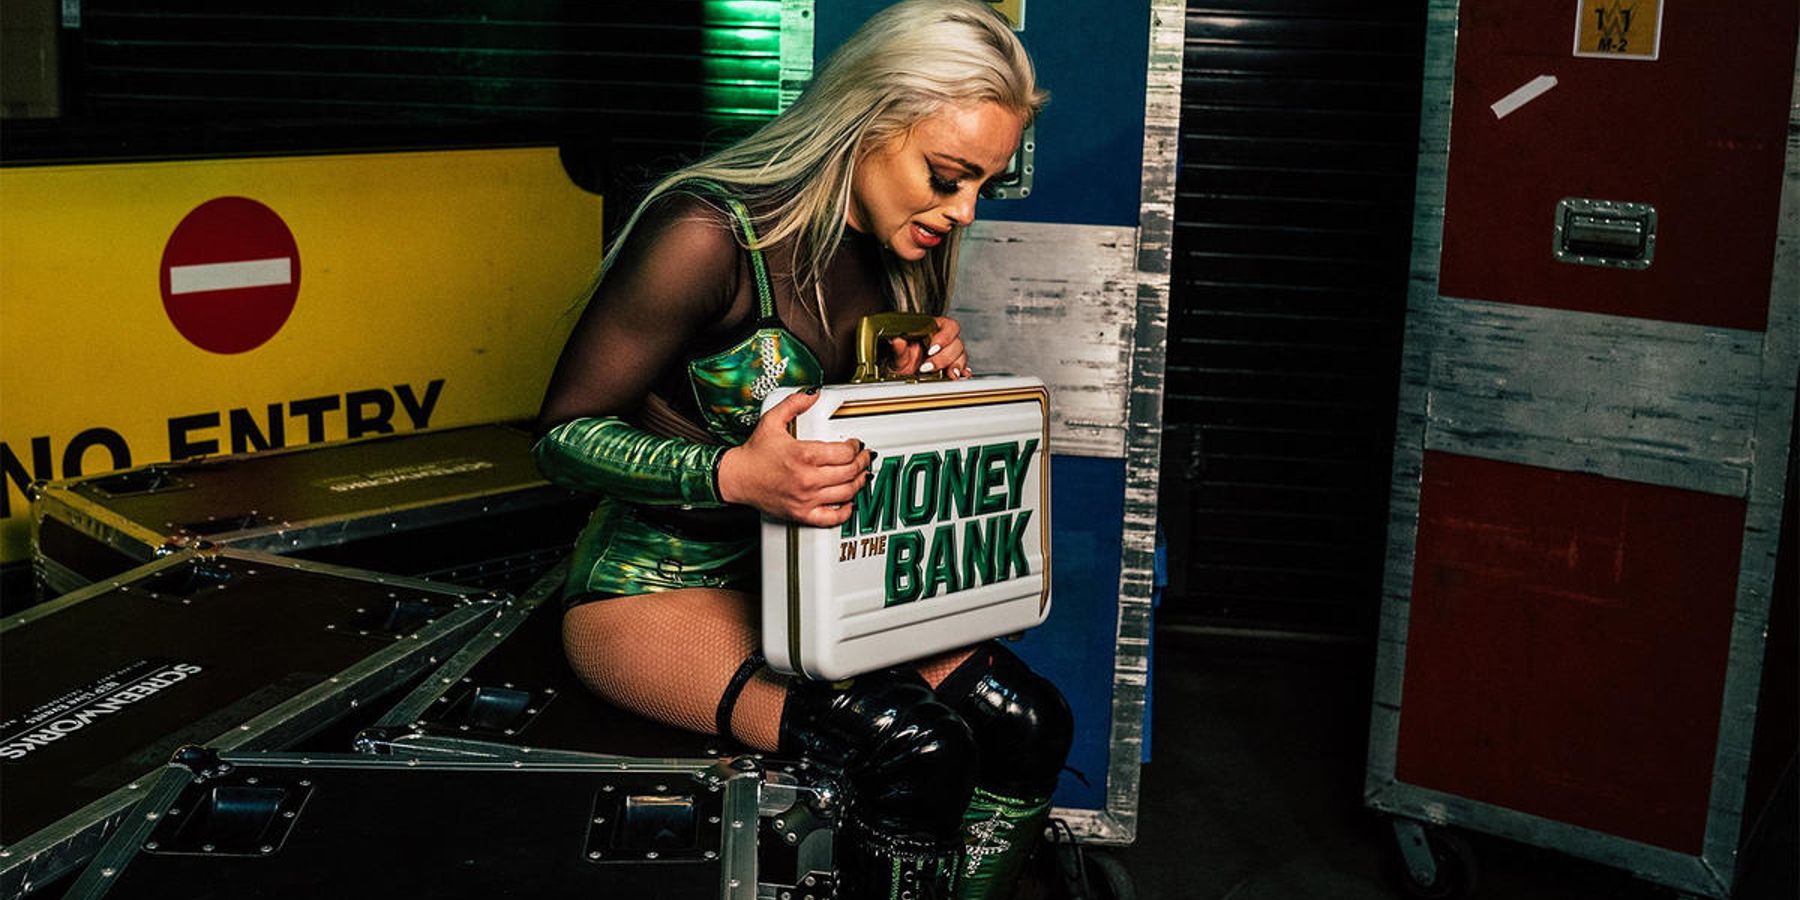 Liv Morgan celebrates her win in the women's Money In The Bank match in WWE.